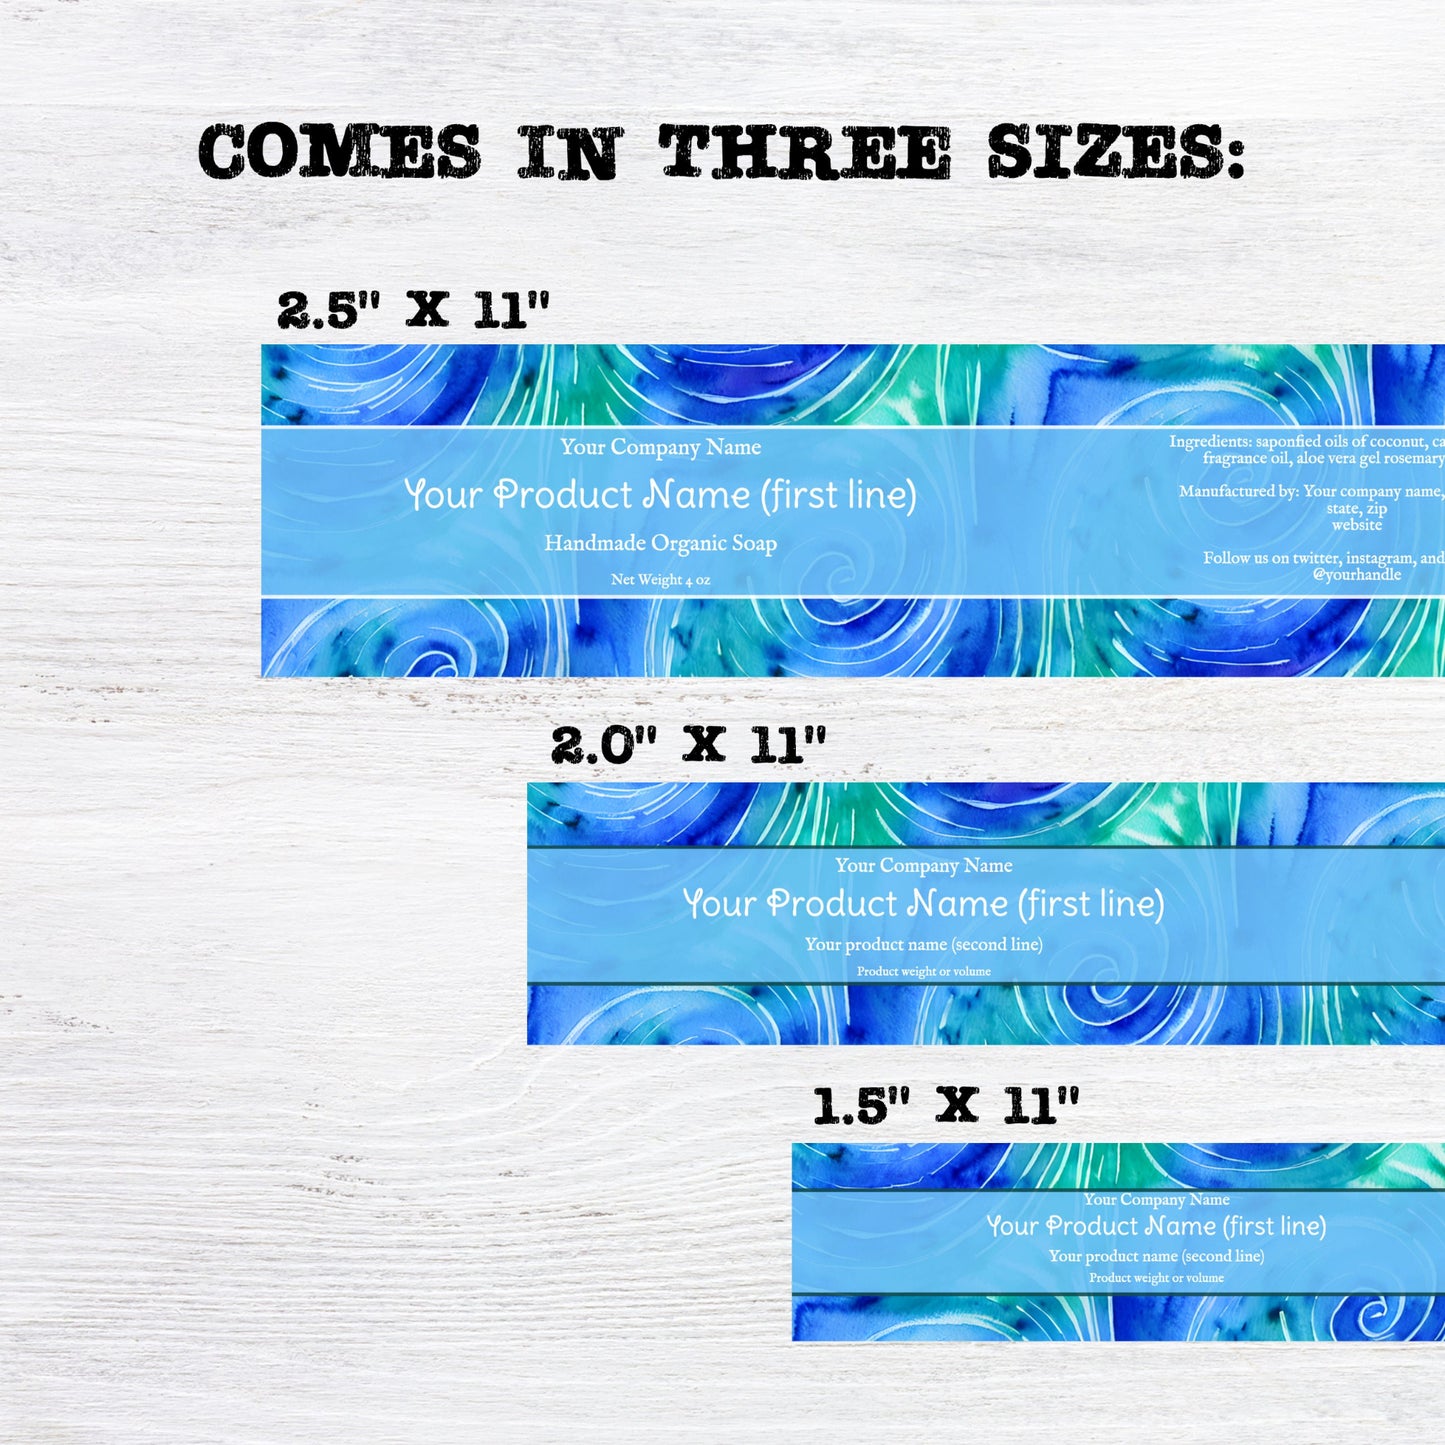 Blue and Green Swirls Editable Printable Soap Label Template